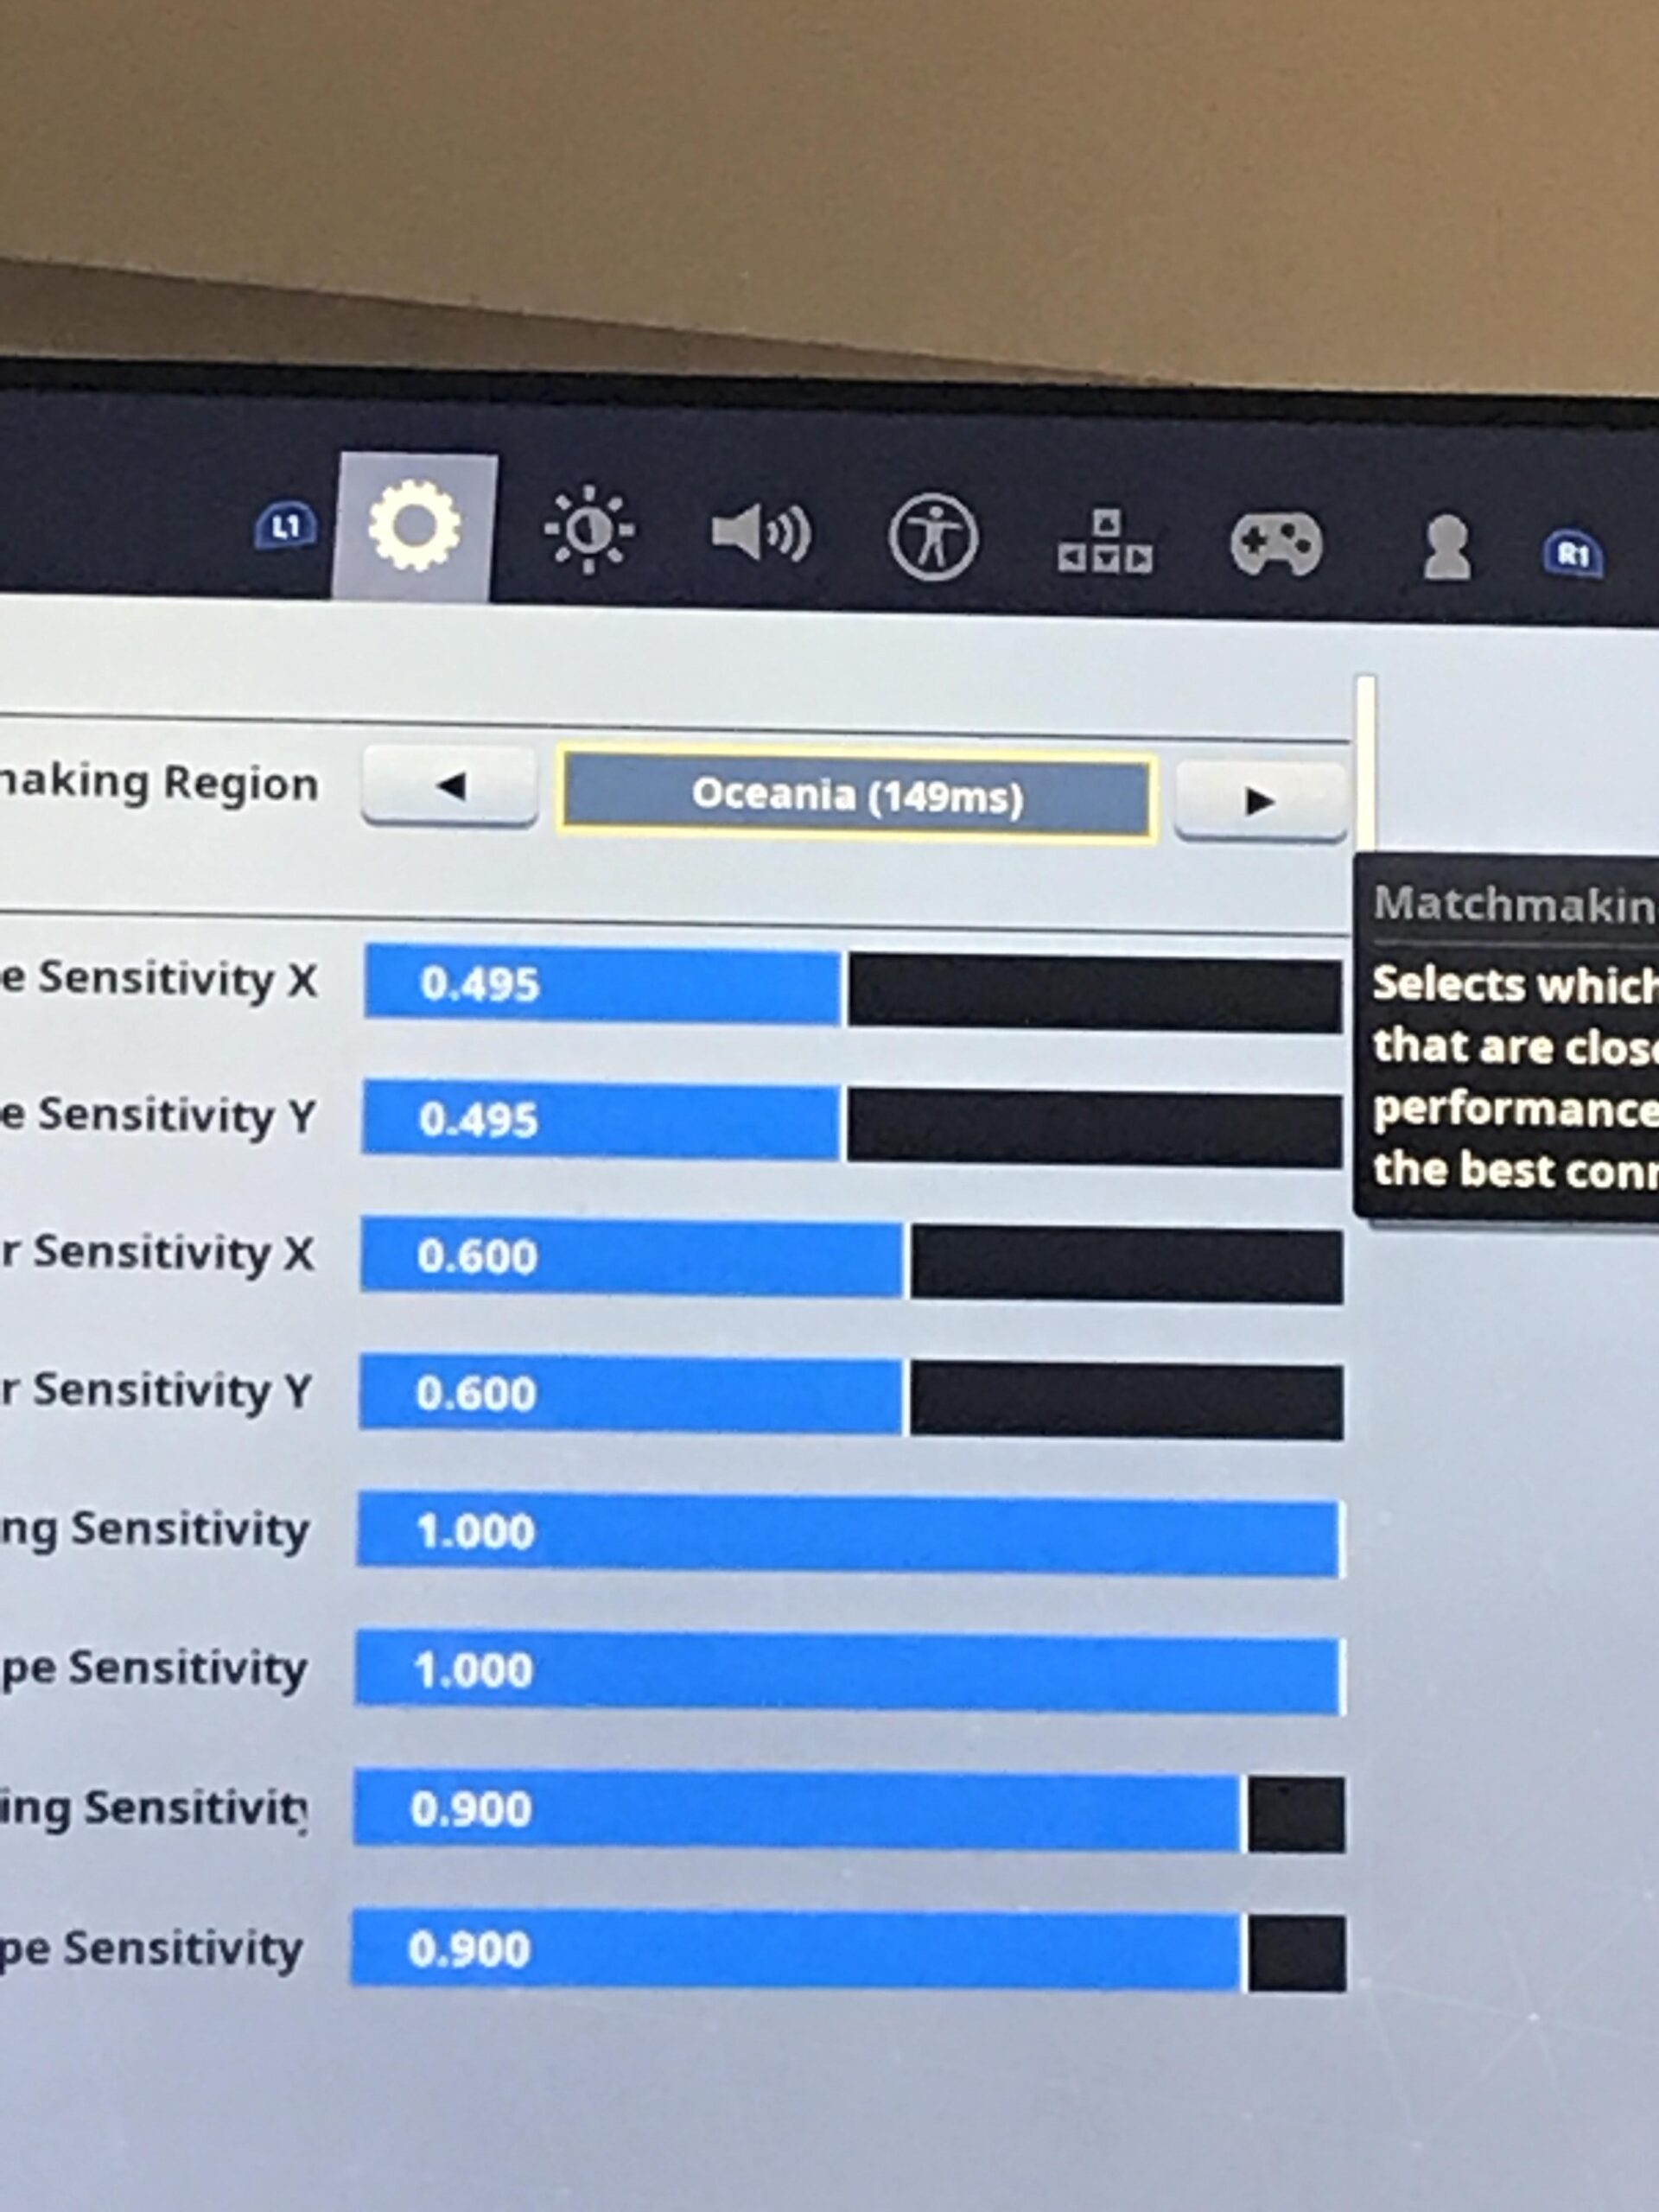 Why My Ping So High on Fortnite?